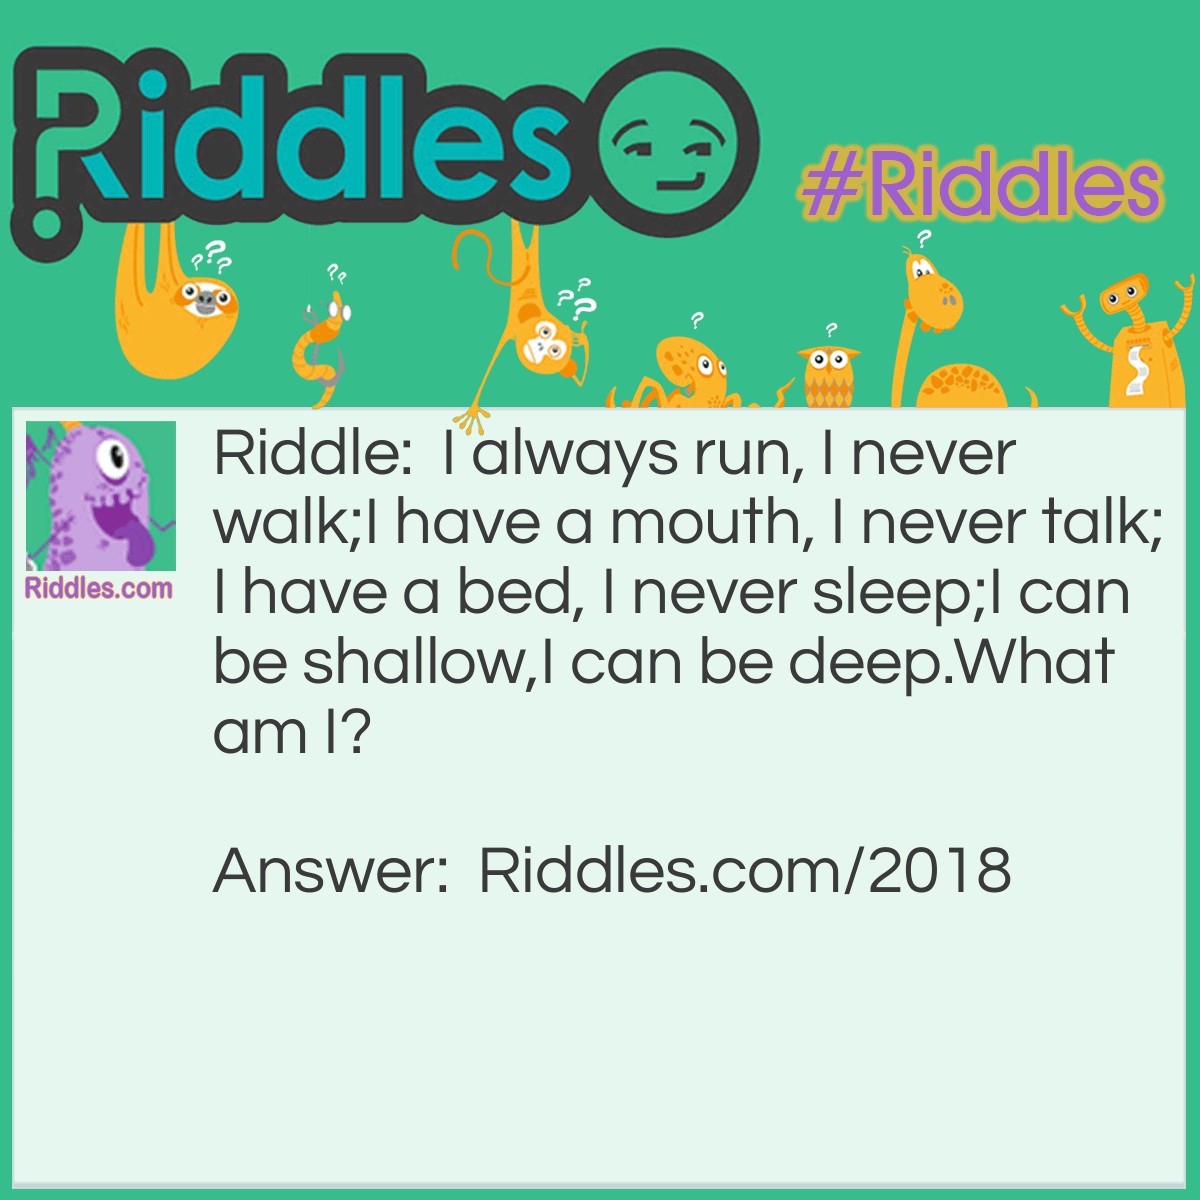 Riddle: I always run, I never walk;
I have a mouth, I never talk;
I have a bed, I never sleep;
I can be shallow,
I can be deep.
What am I? Answer: A River.